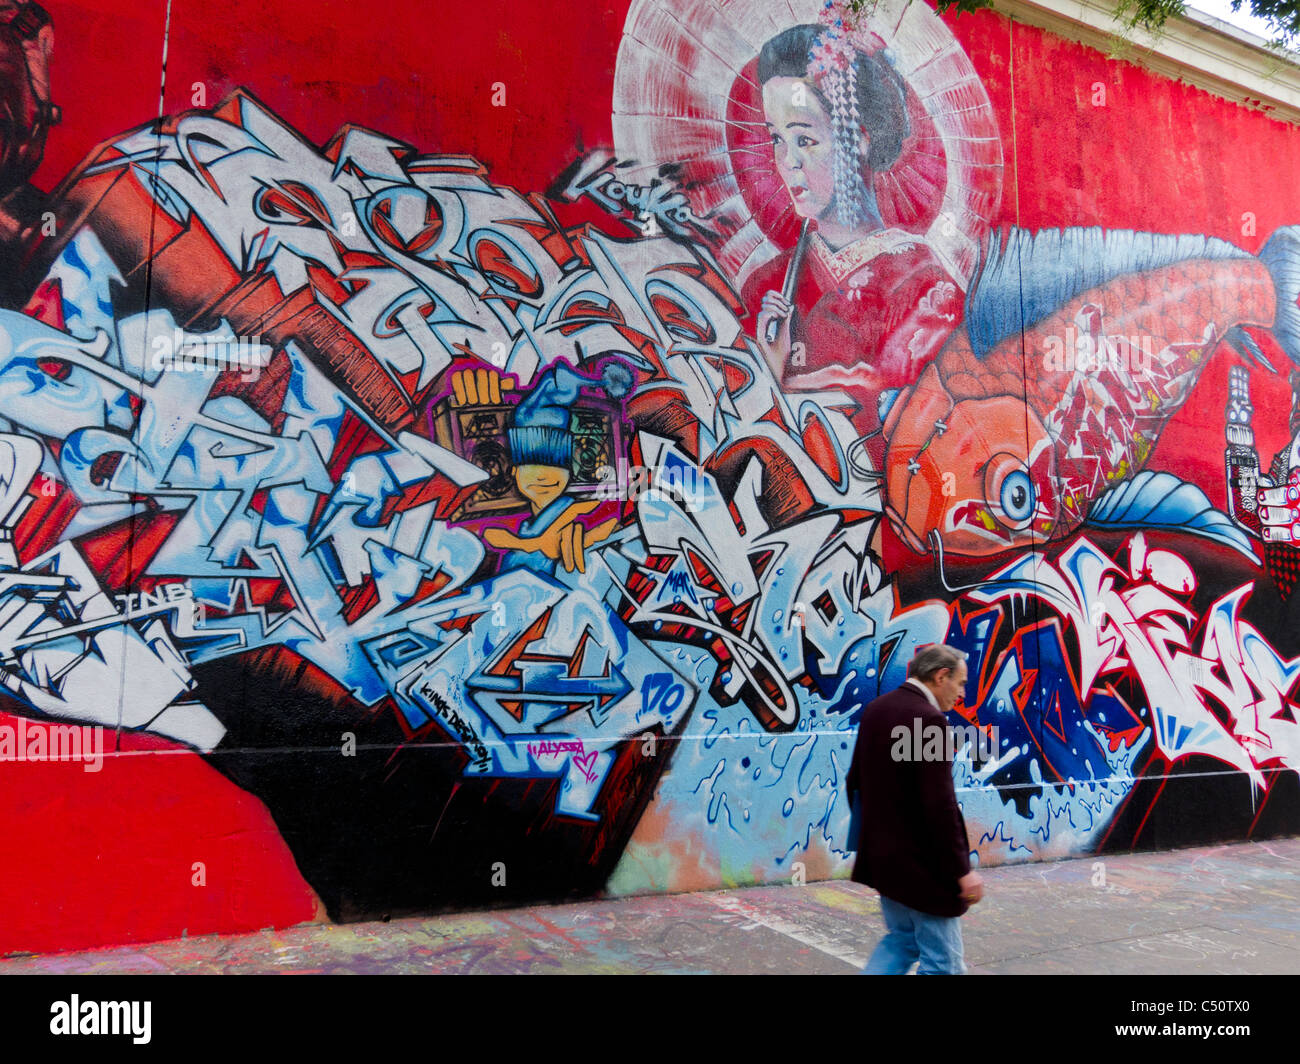 hi-res - graffiti Japanese photography Alamy stock and images